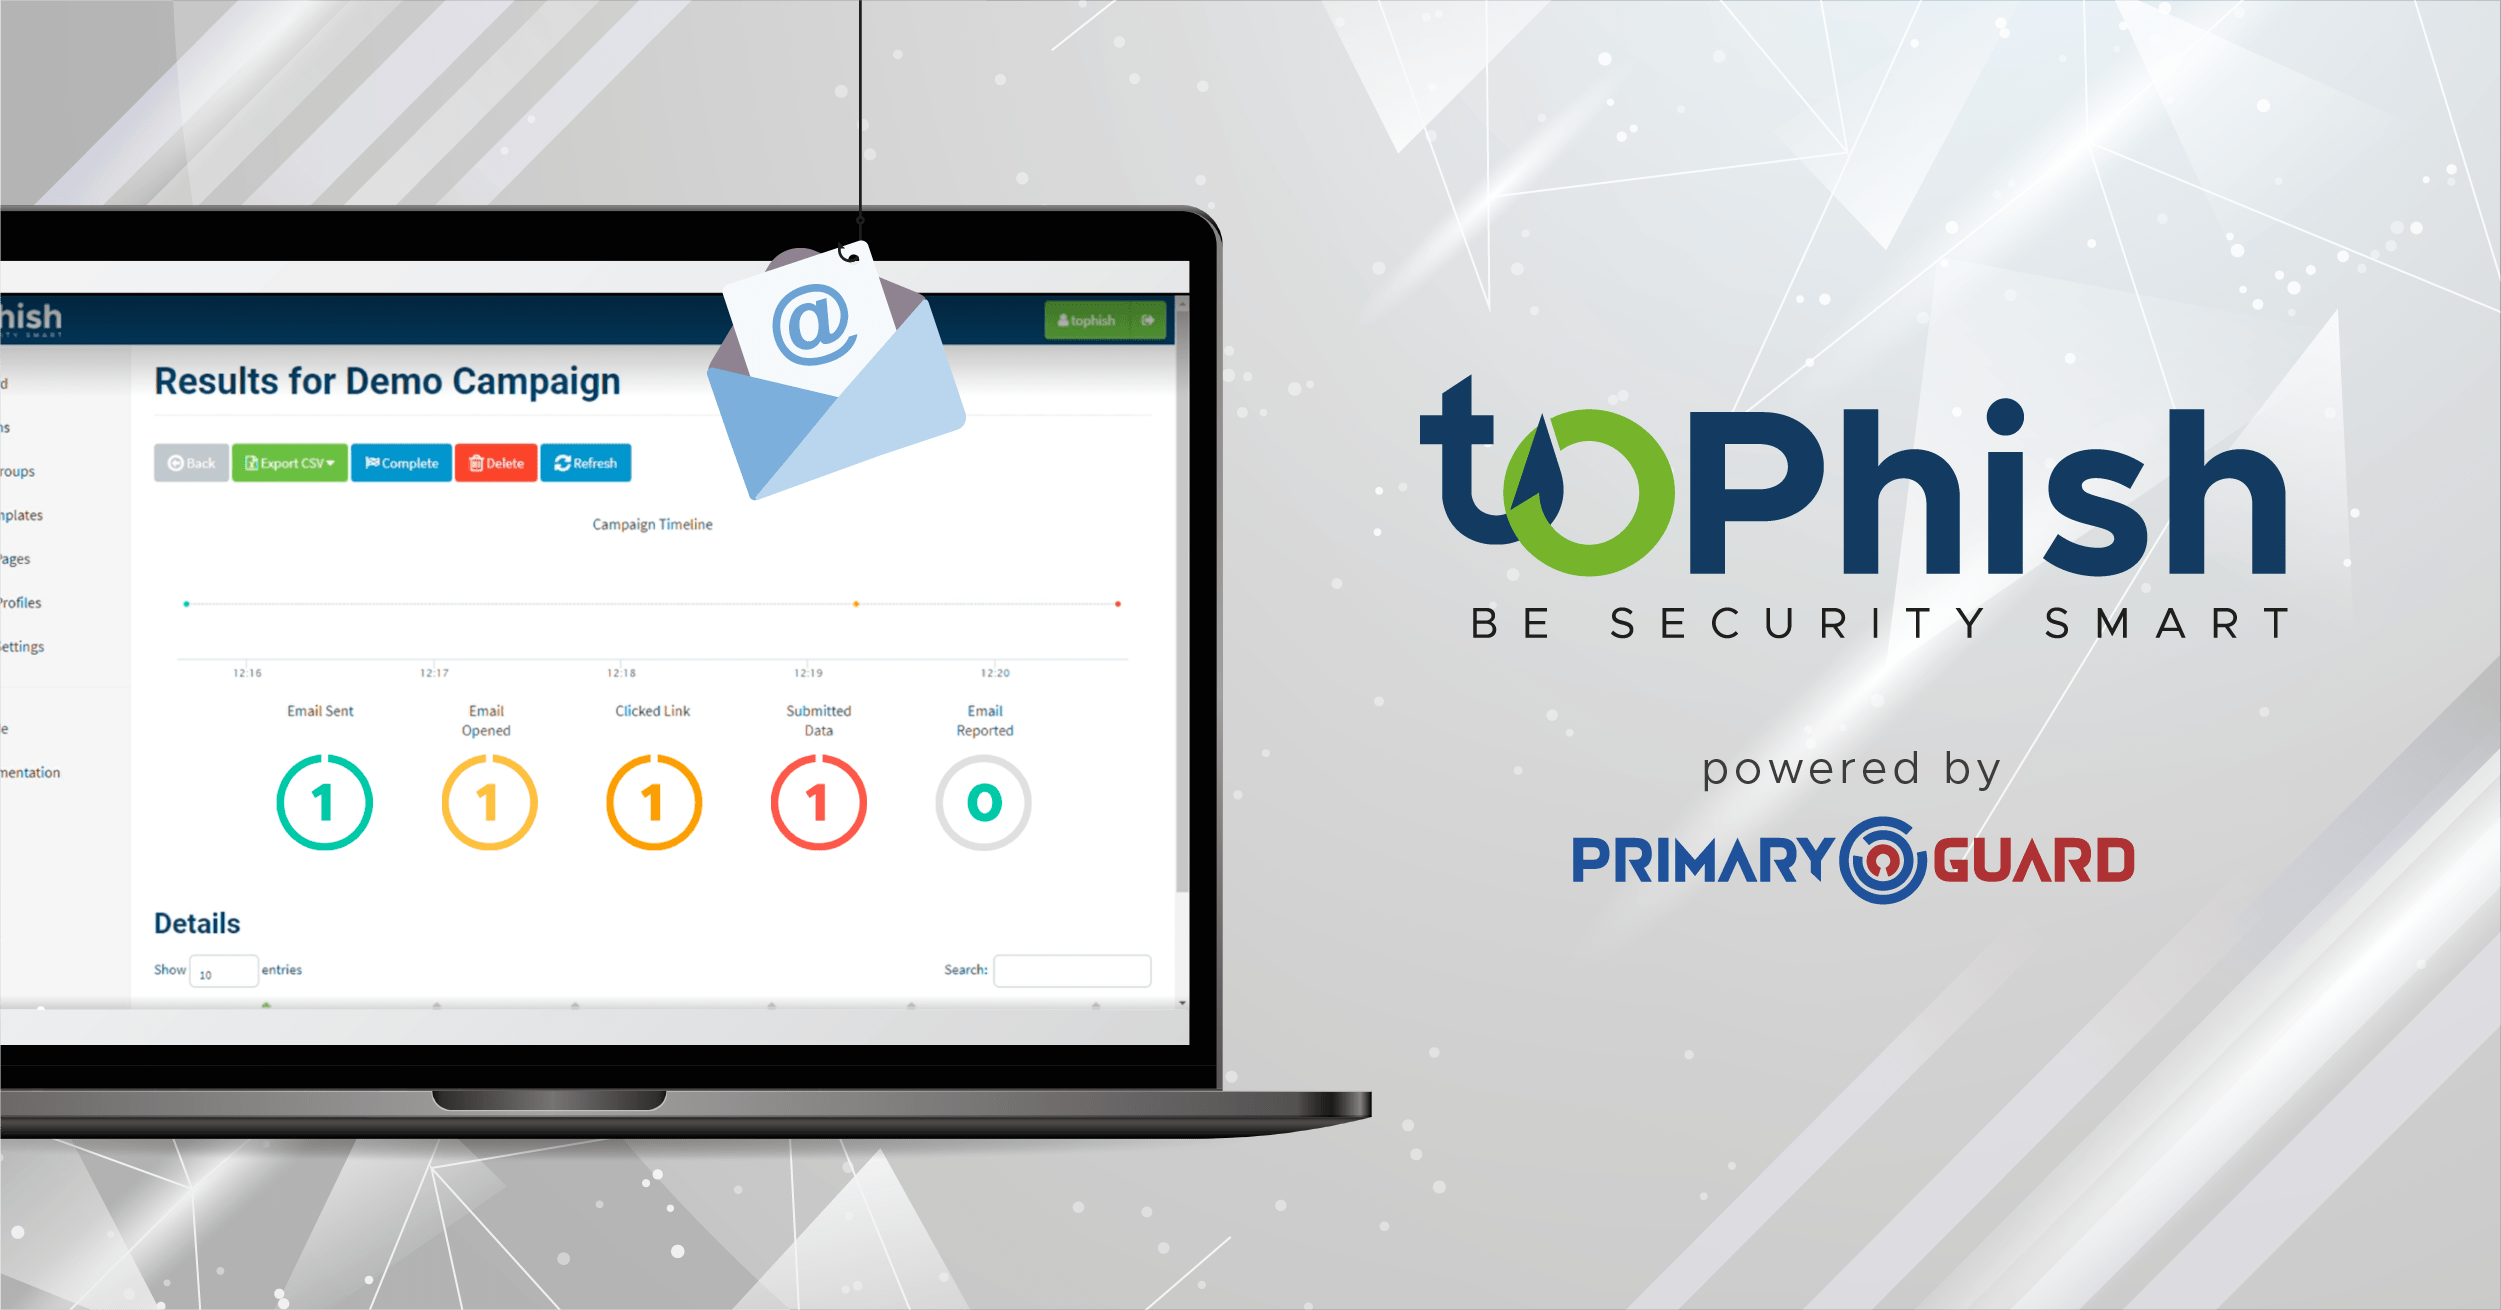 Primary Guard Launches ToPhish in Conjunction with National Cyber Security Month